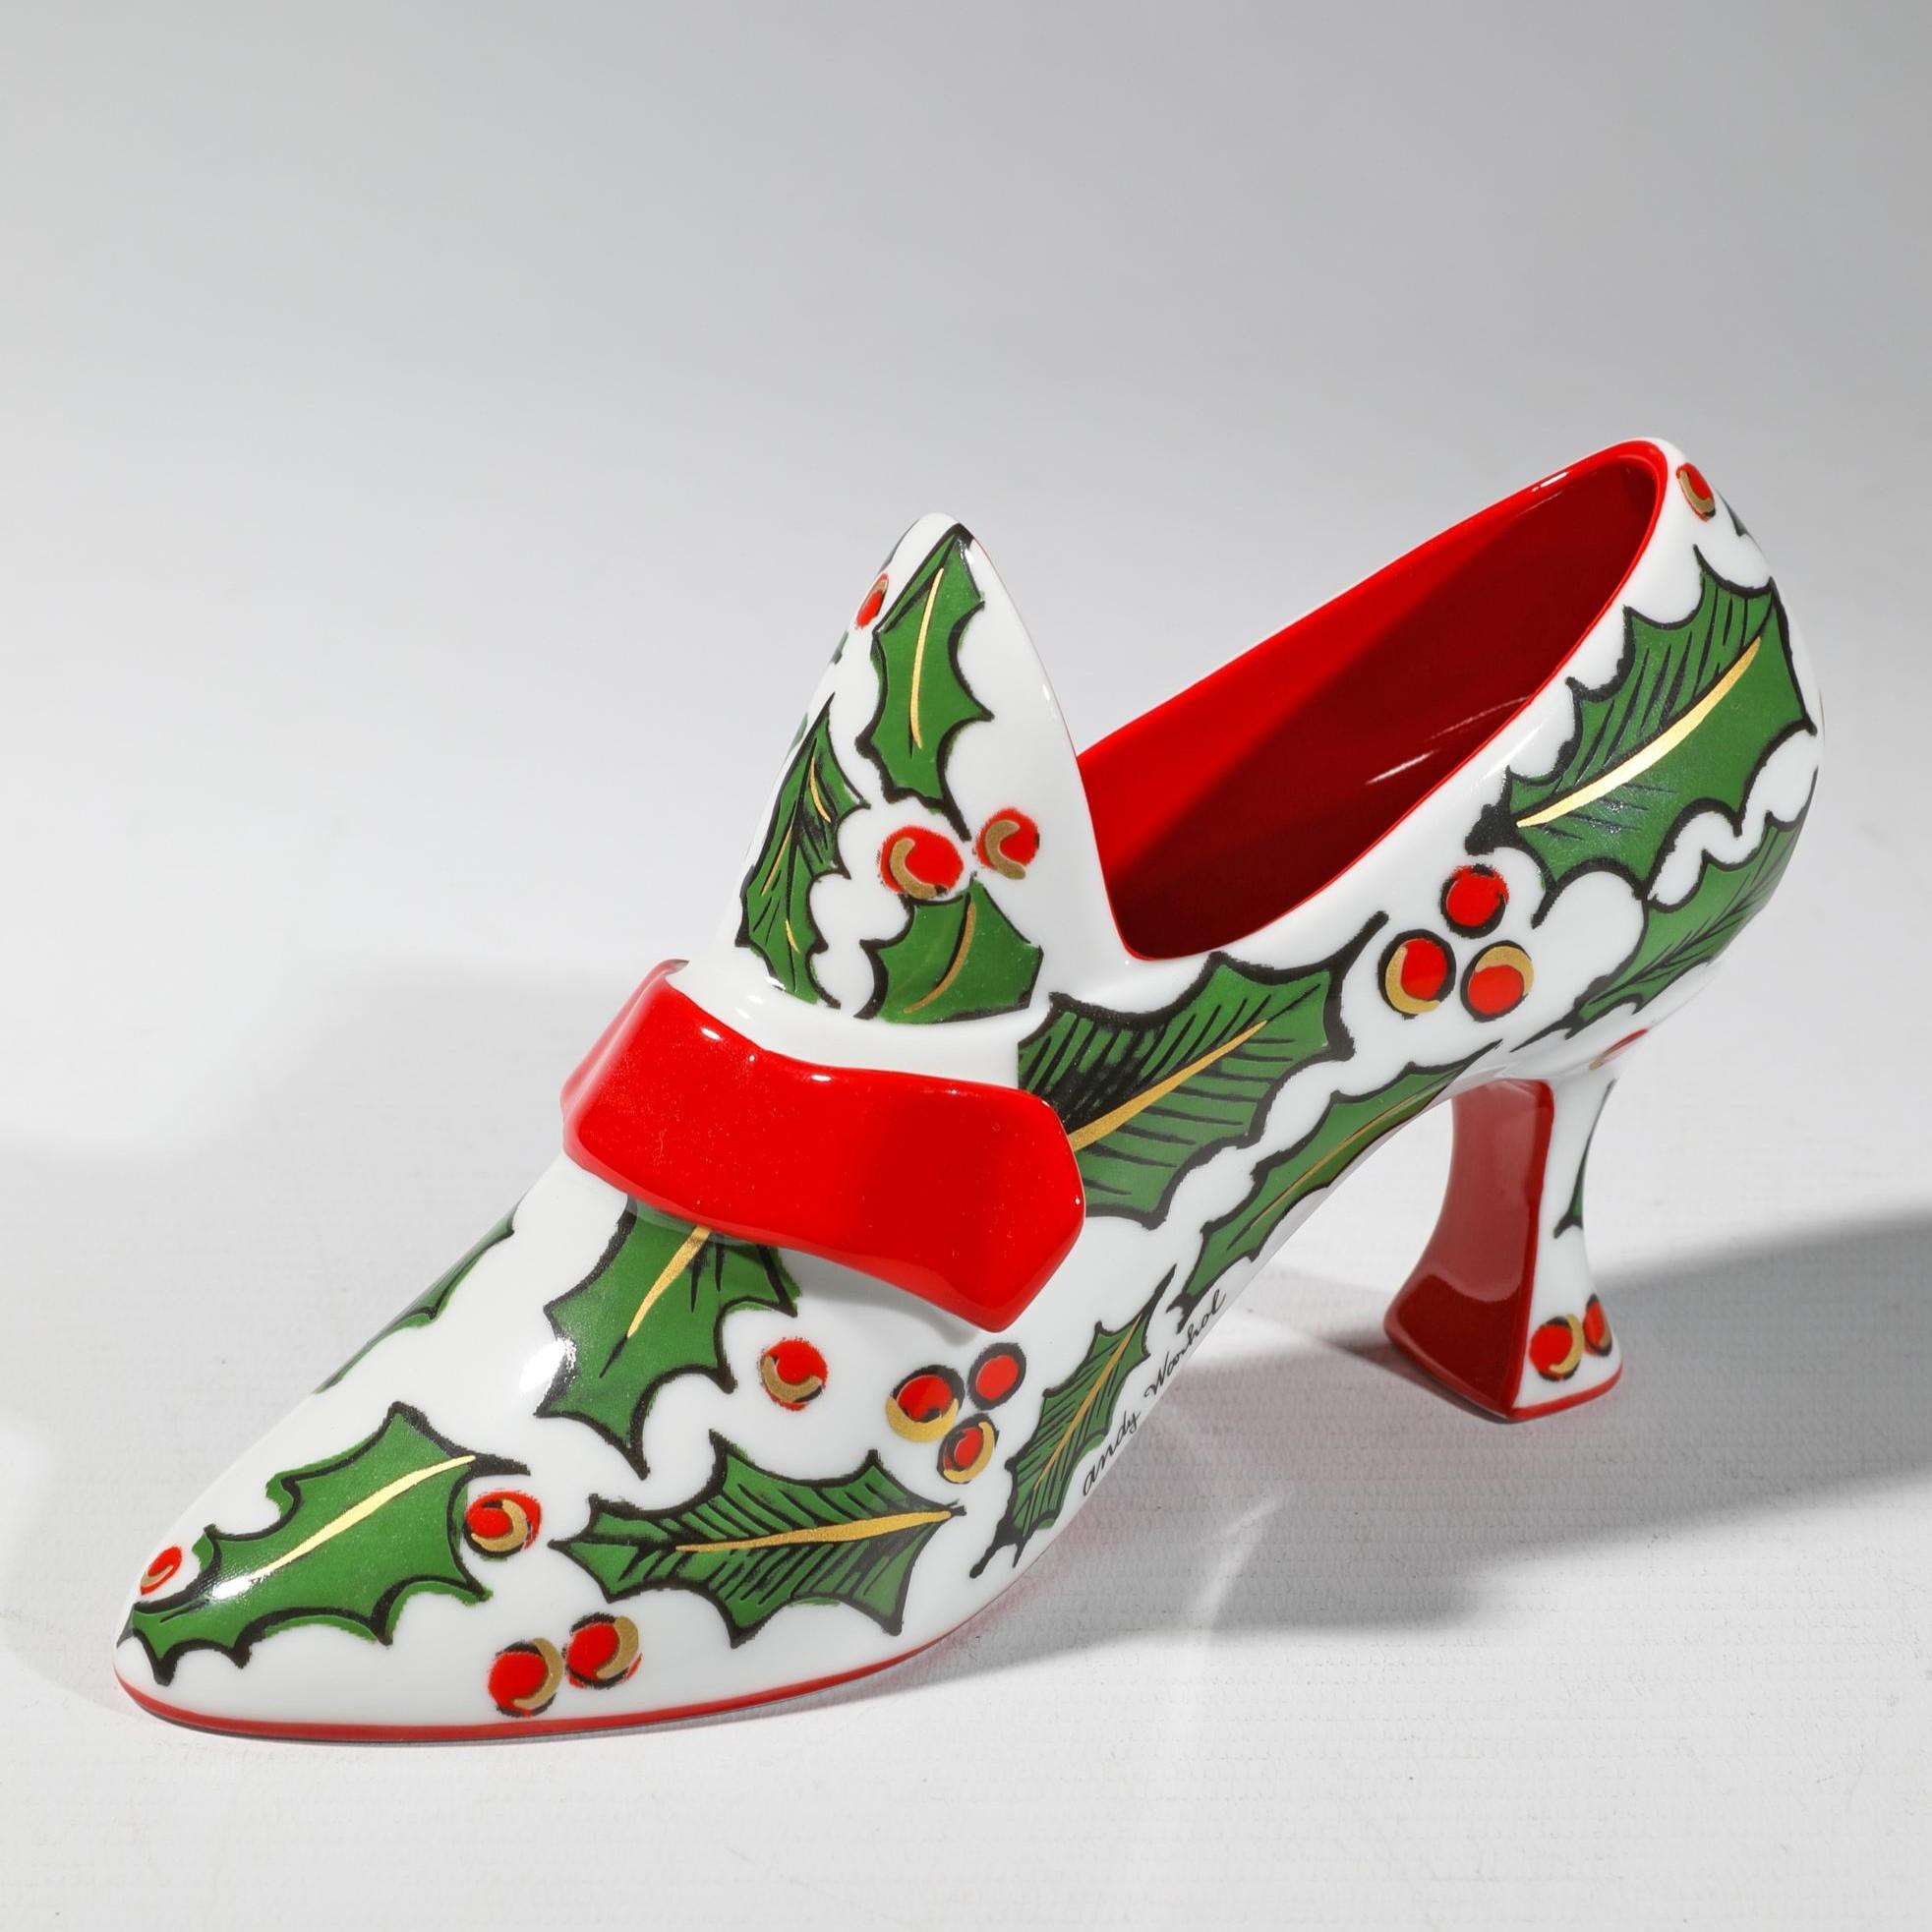 Merry Christmas Shoe
2003
Enamel on porcelain
10.4 × 20 × 7.5 cm
(4.1 × 7.9 × 3 in)
Signed in glaze, numbered on the reverse. In wooden box, accompained by certificate from the Rosenthal Studio
Edition of 99
In mint condition

Although best known